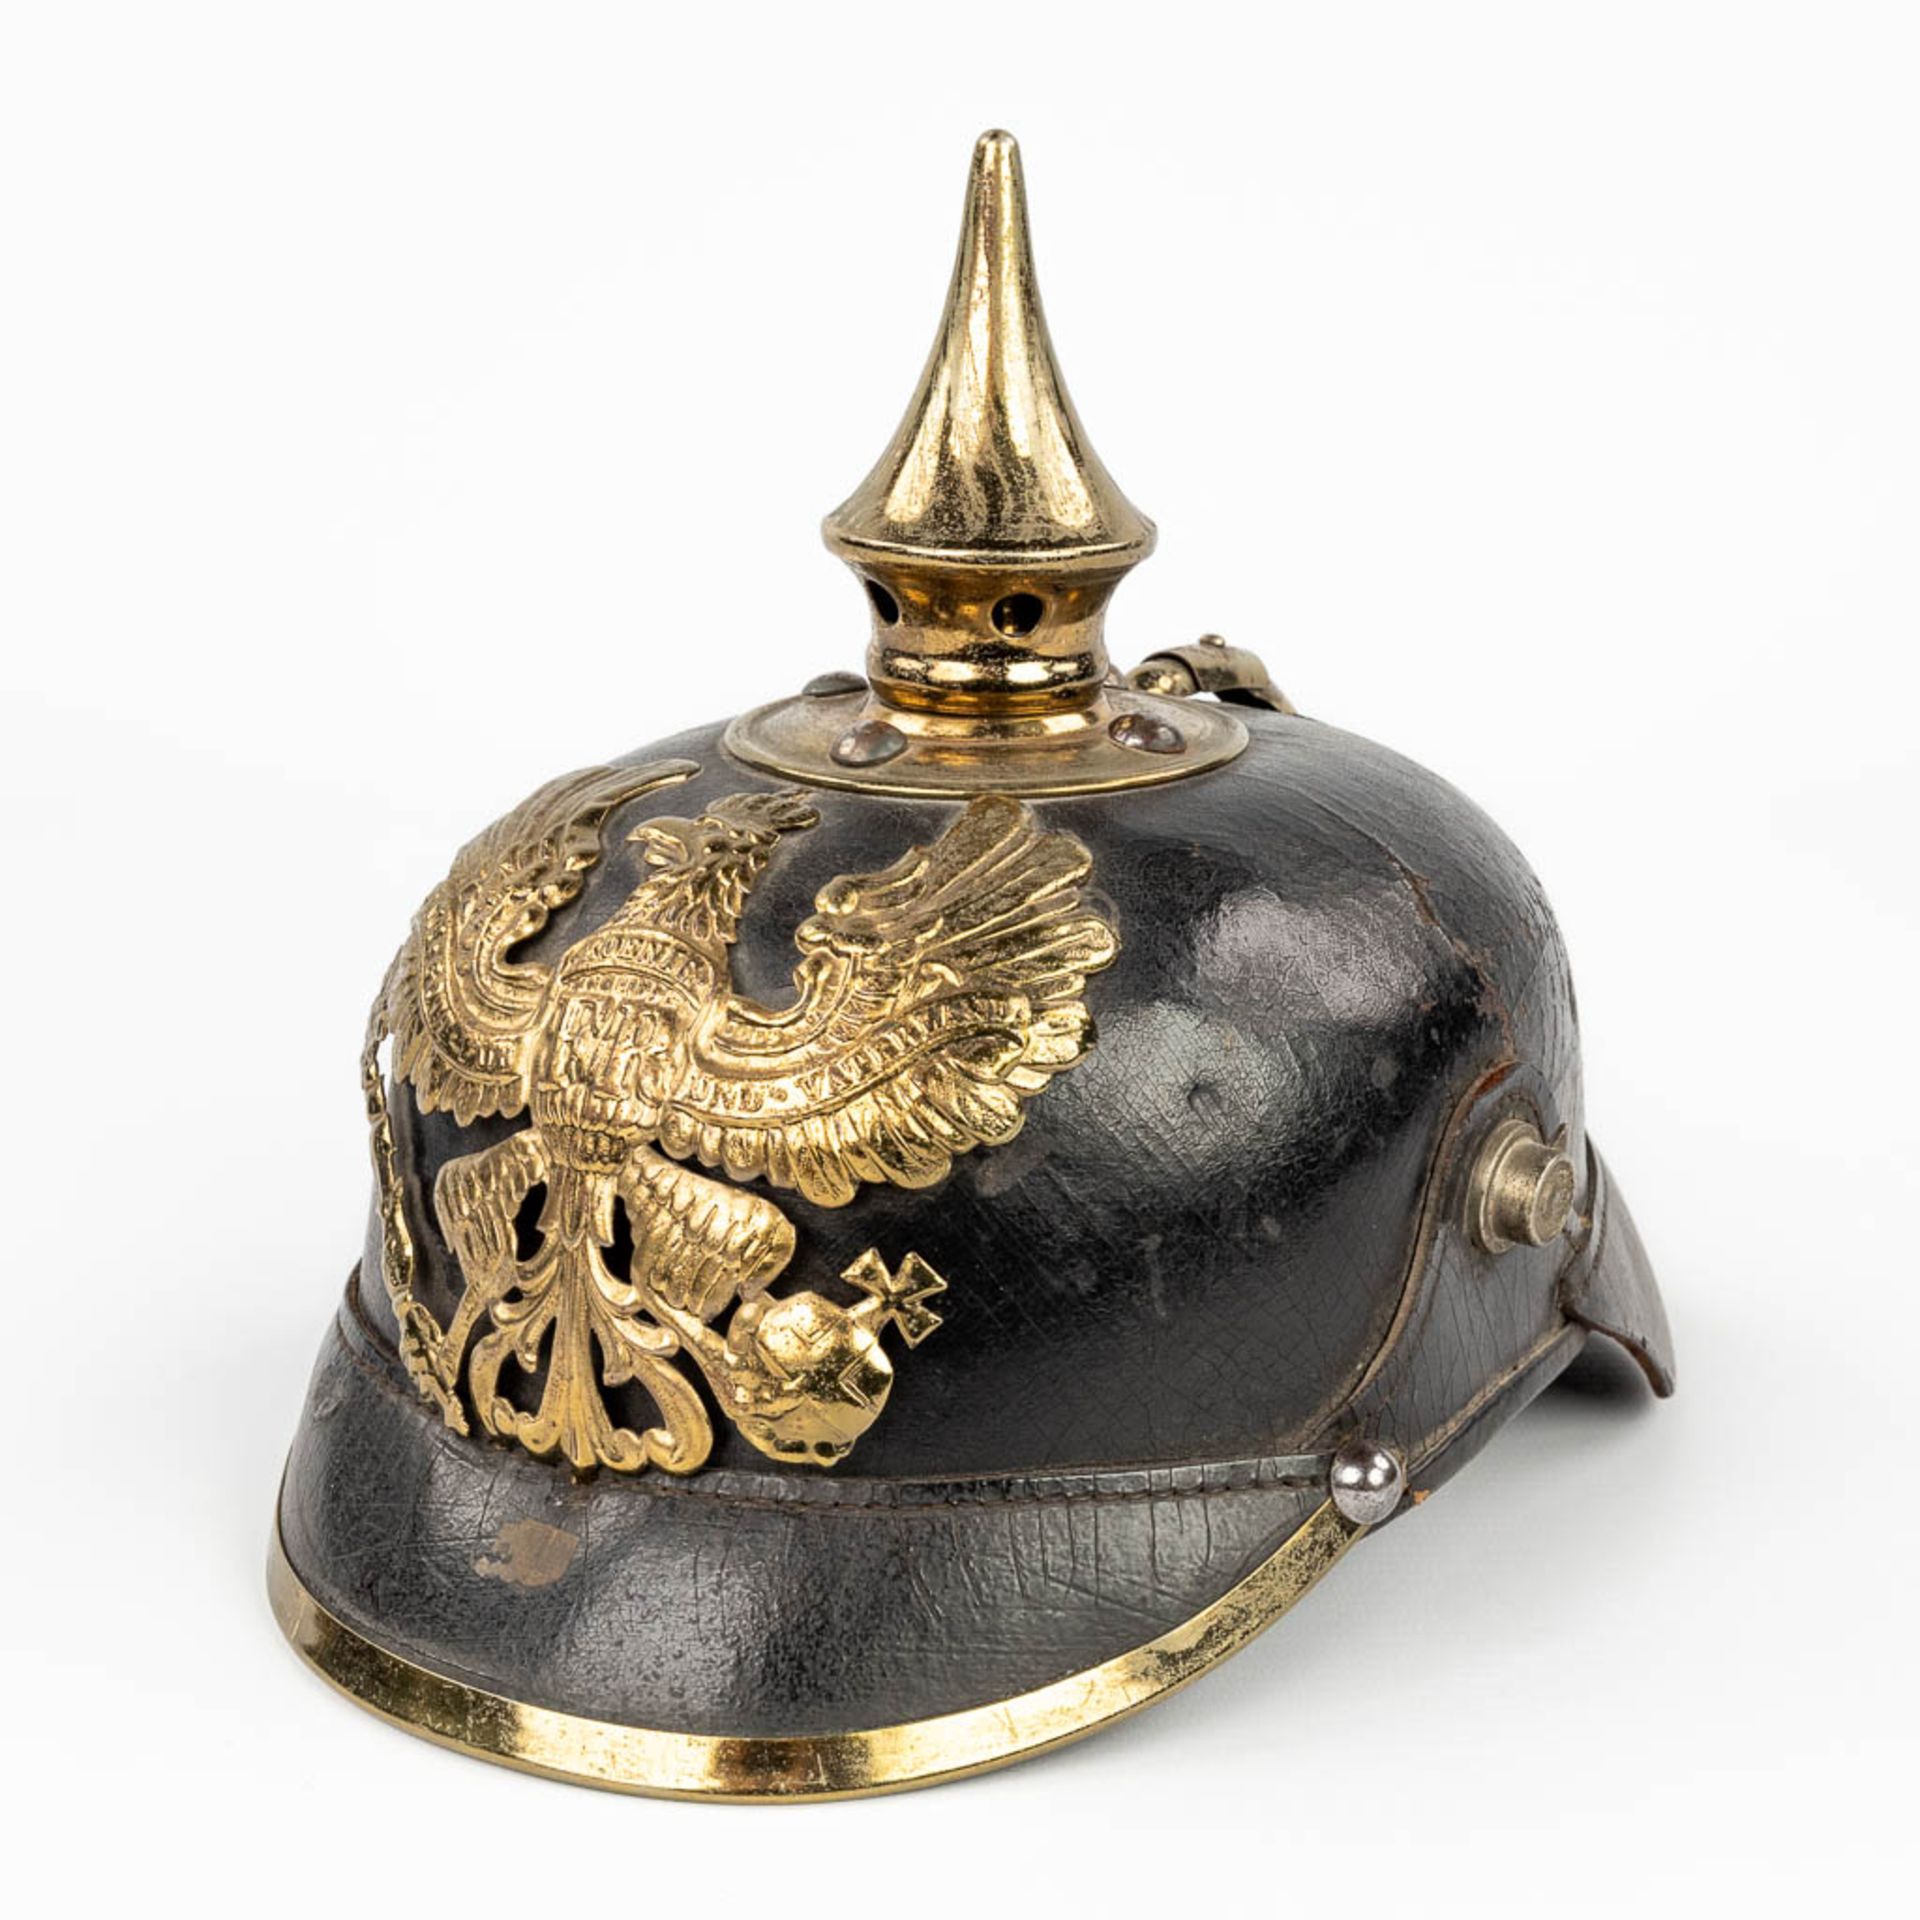 An antique German 'Pickelhaube' decorated with an eagle. Dating 1914-1918. (L:25 x W:18 x H:21 cm) - Bild 12 aus 17